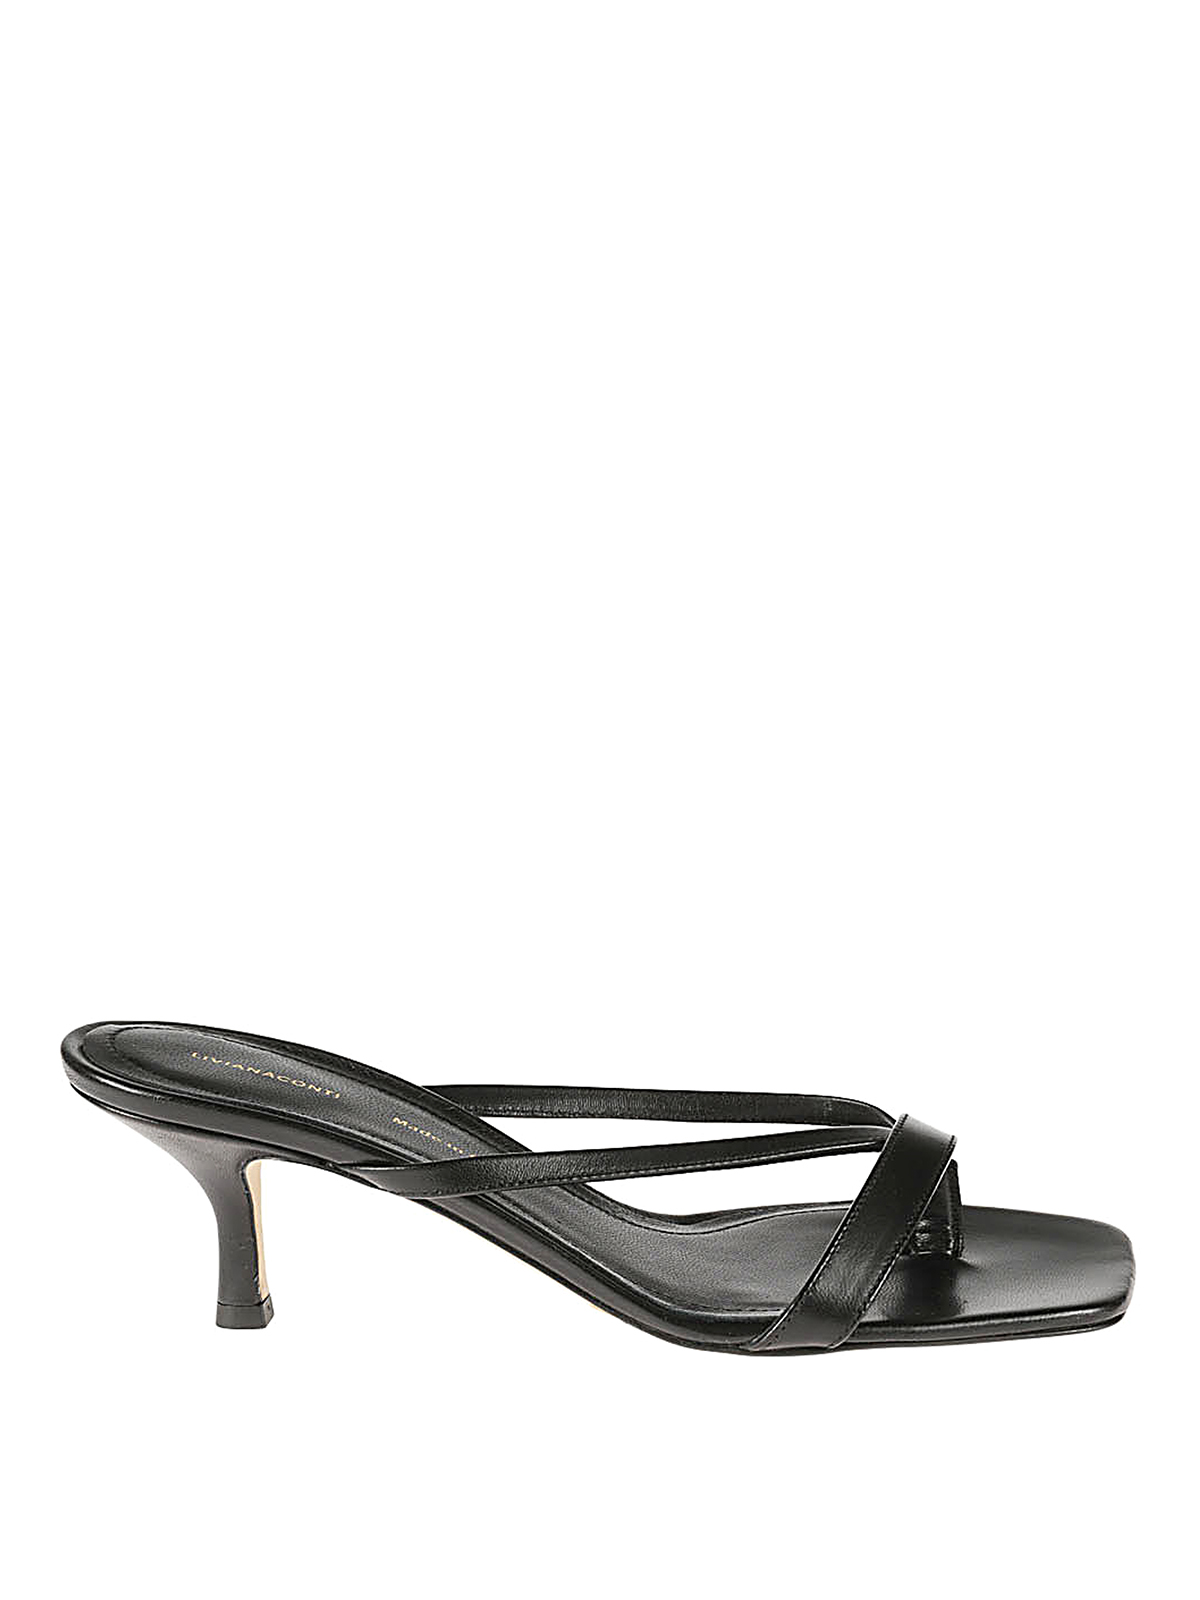 Liviana Conti Leather Thong Sandals In Black